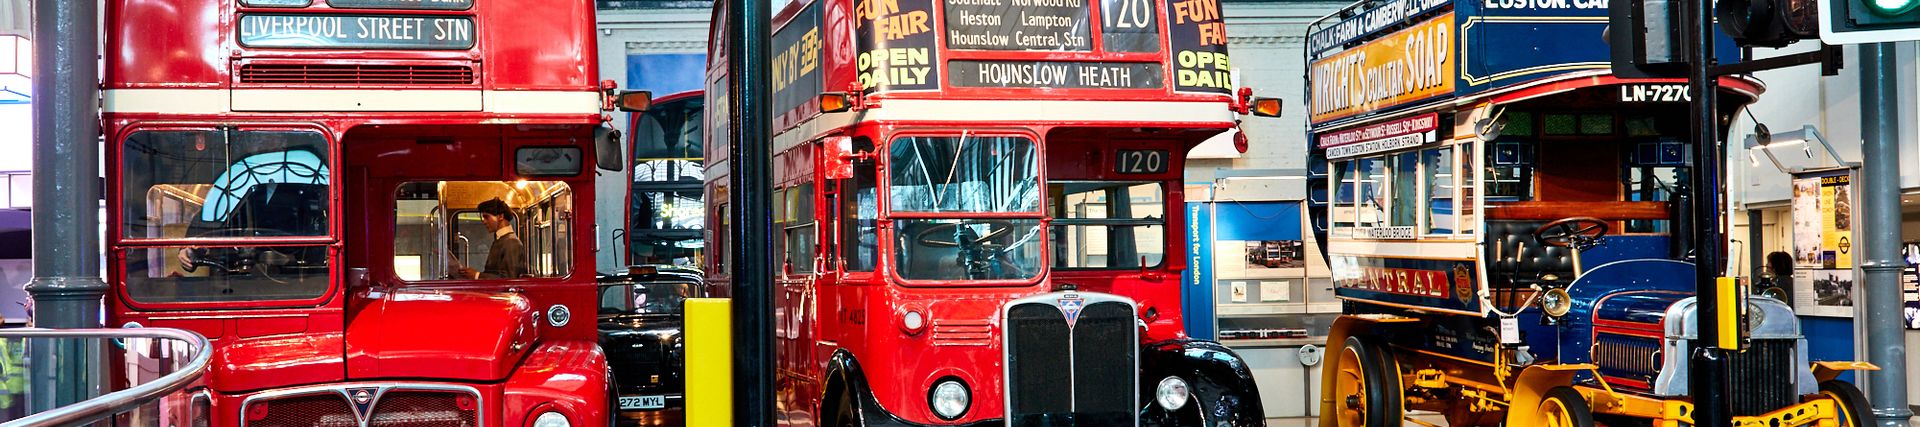 Two red Routemaster buses and a blue and yellow Leyland bus at London Transport Museum. In the foreground, the bottom of traffic light showing a green light is visible